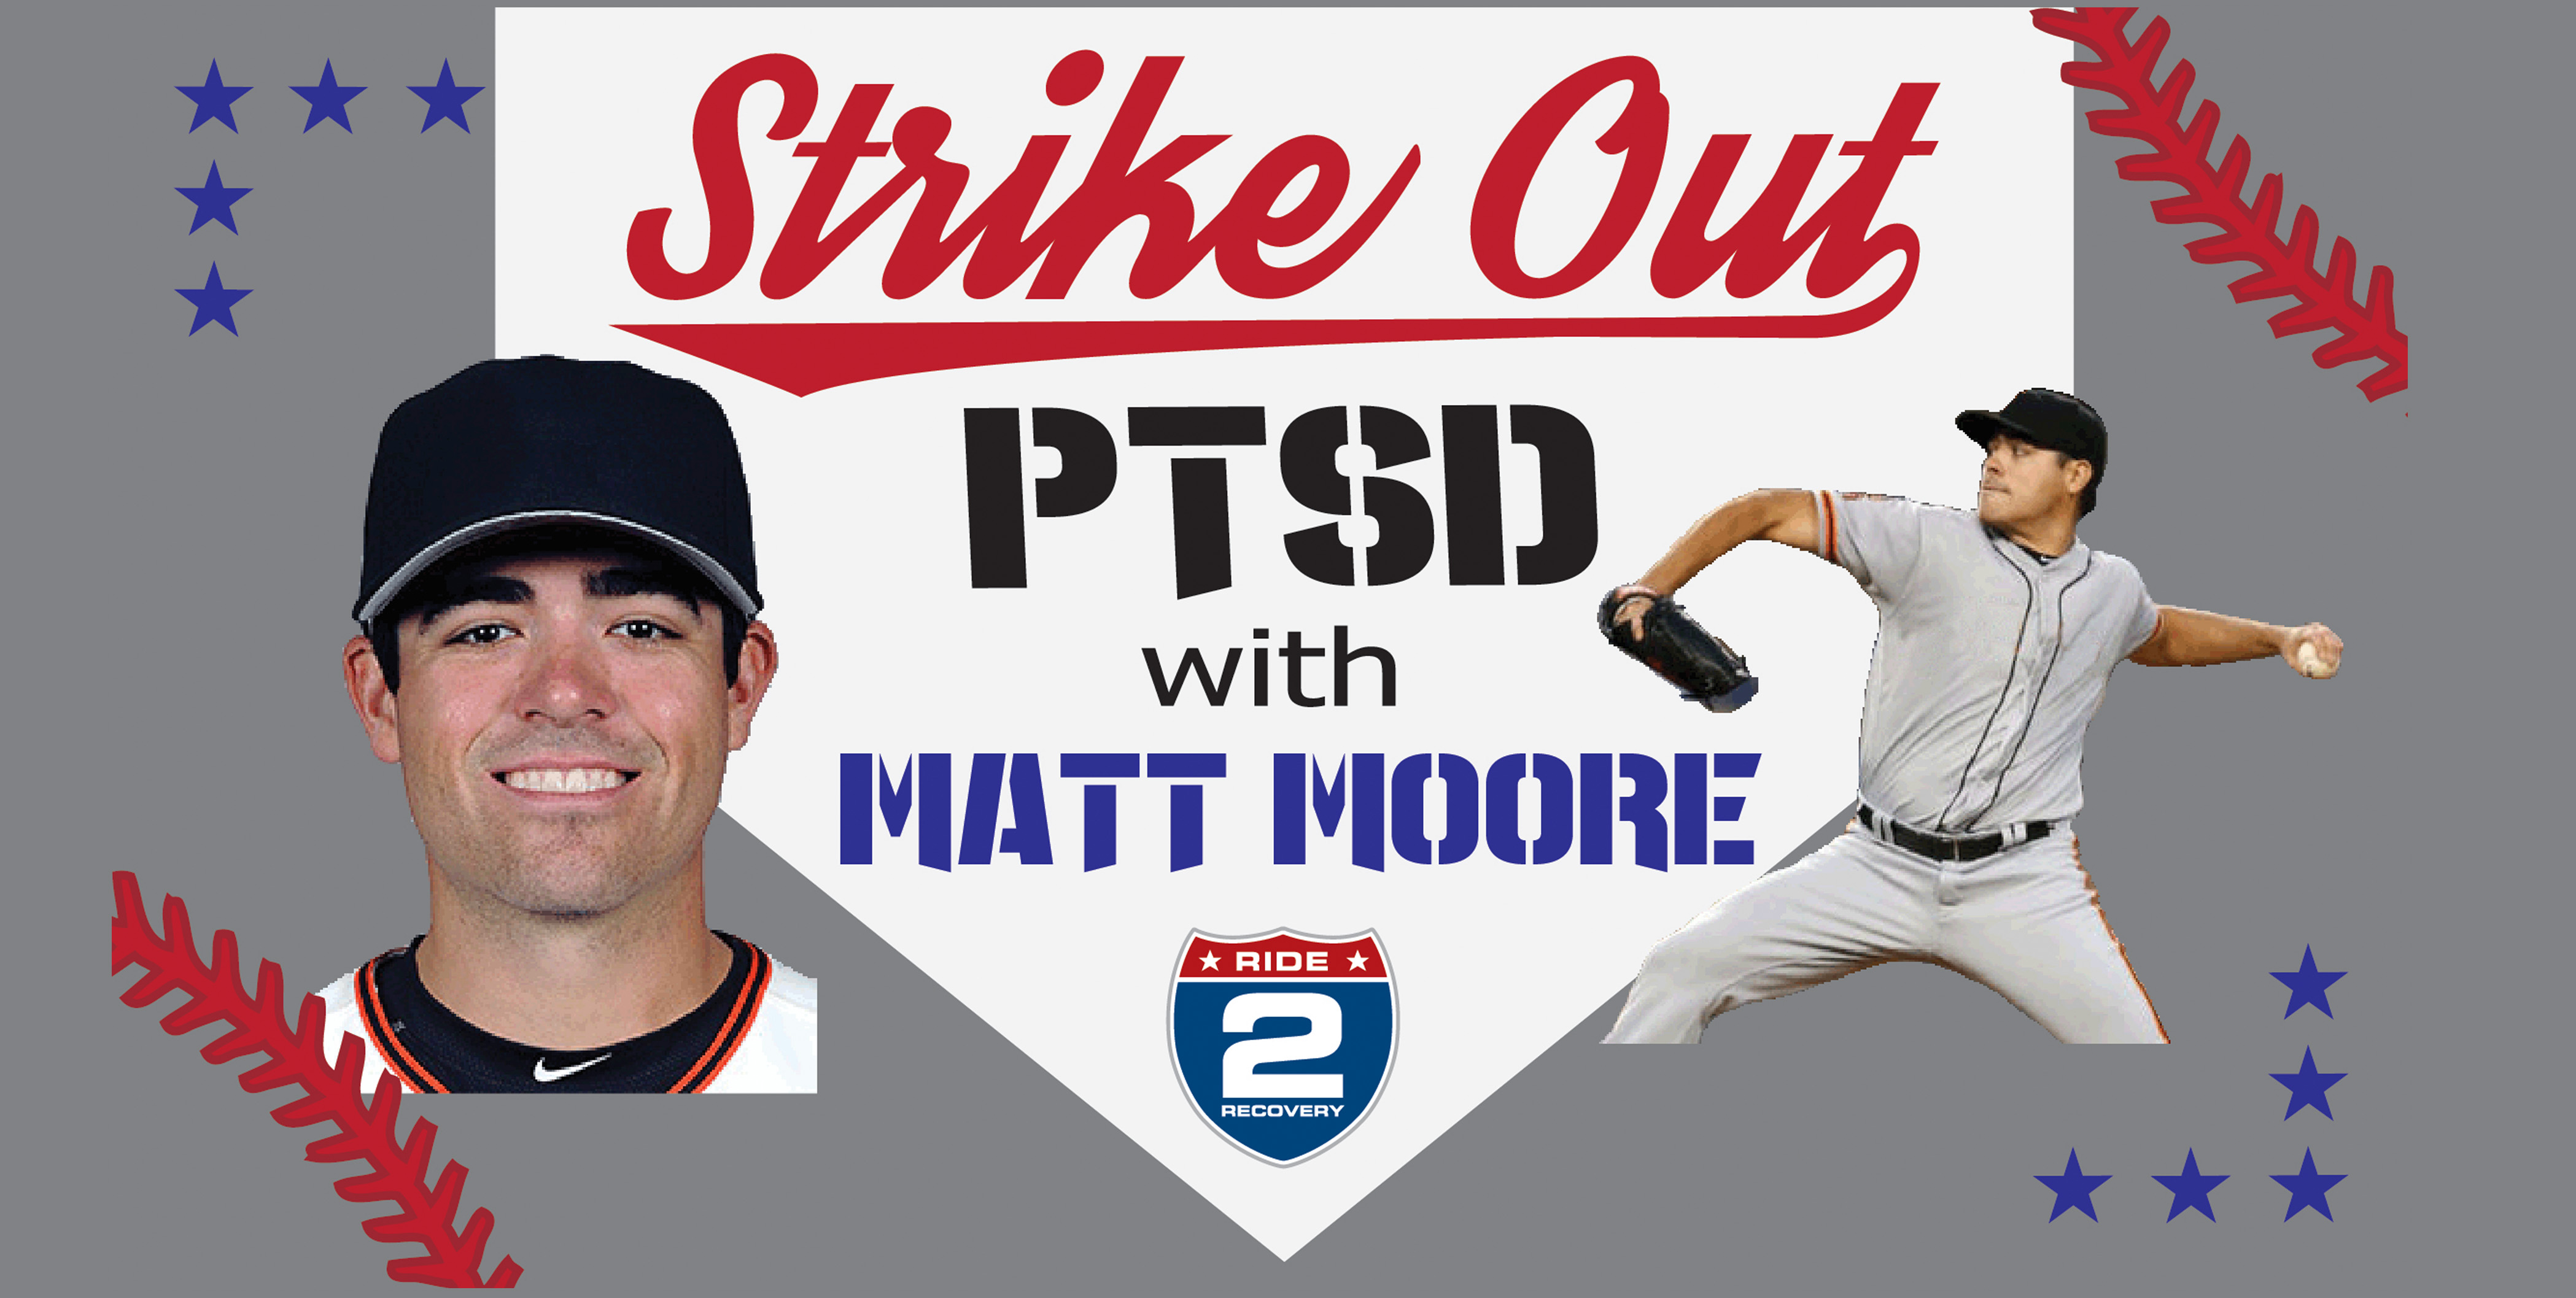 Strike Out PTSD with Matt Moore